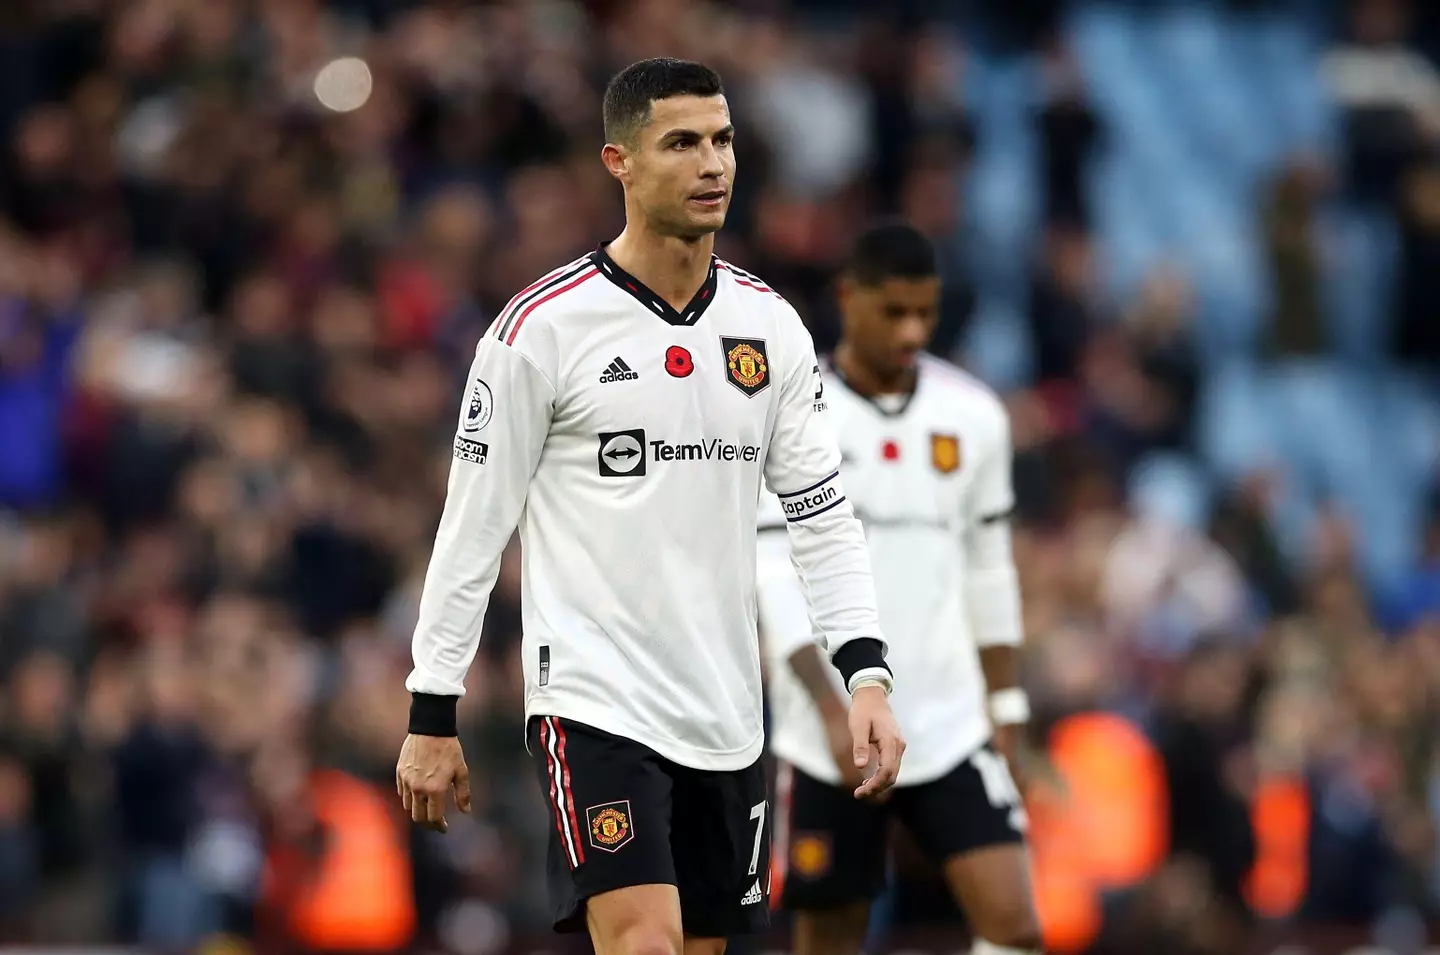 Ronaldo's final game for United came against Aston Villa, when he was captain. Image: Alamy